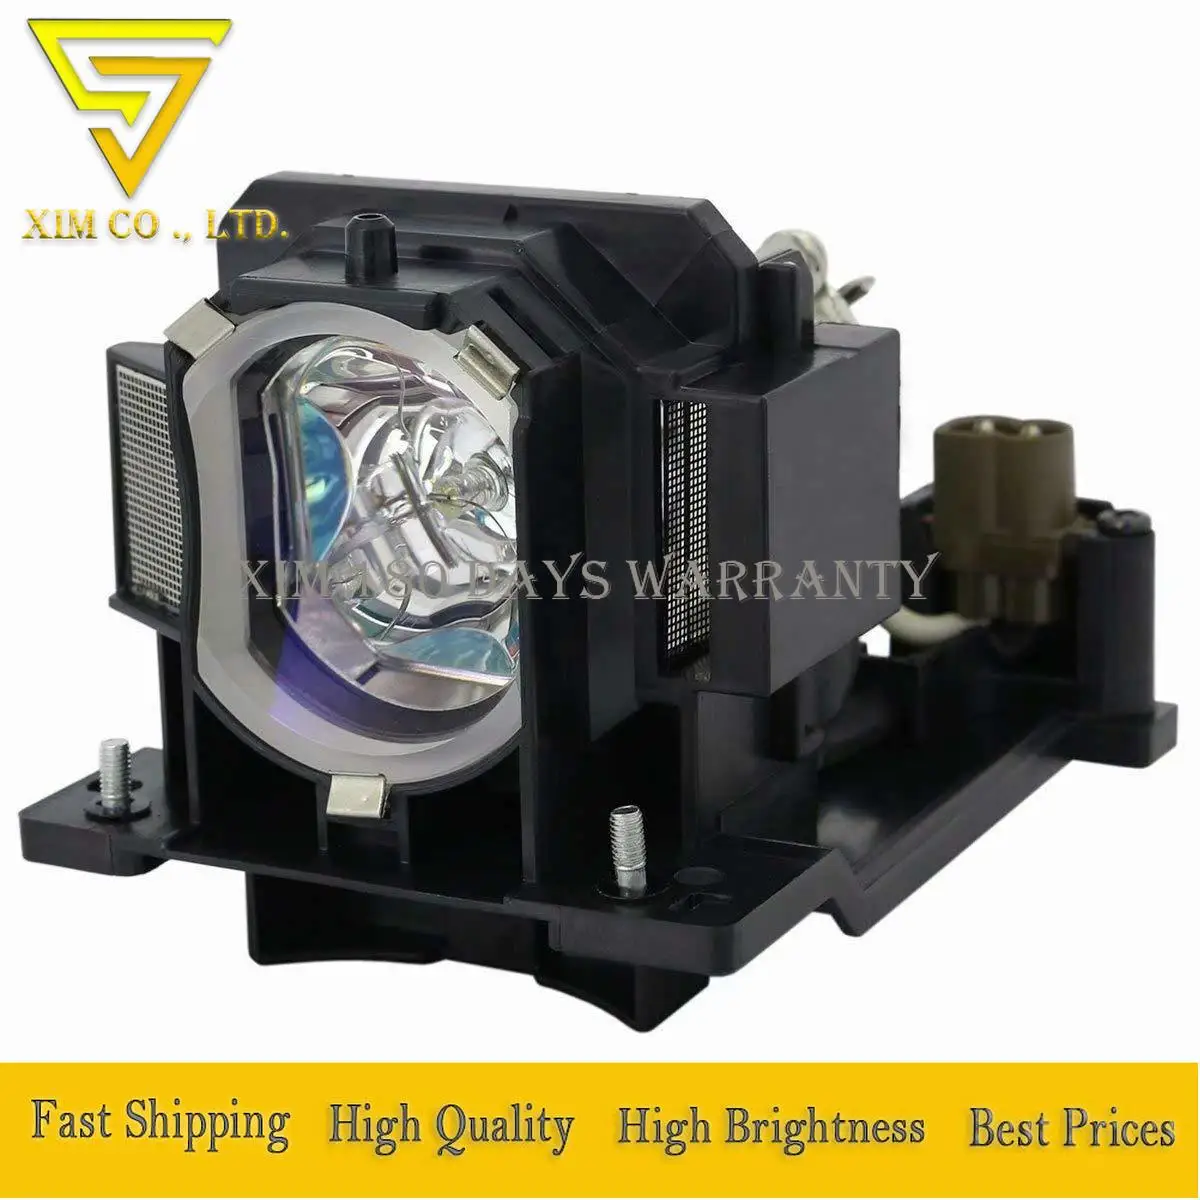 DT01091 Projector Lamp For Hitachi CP-AW100N CP-D10 CP-DW10 ED-AW100N ED-AW110N HCP-Q3 HCP-Q3W CP-DW1 high quality With Housing replacement projector lamp bulb dt01472 for hitachi cp wu8460 cp wu8461 cp wu8265 cp x8170 hcp d767u lamp projector